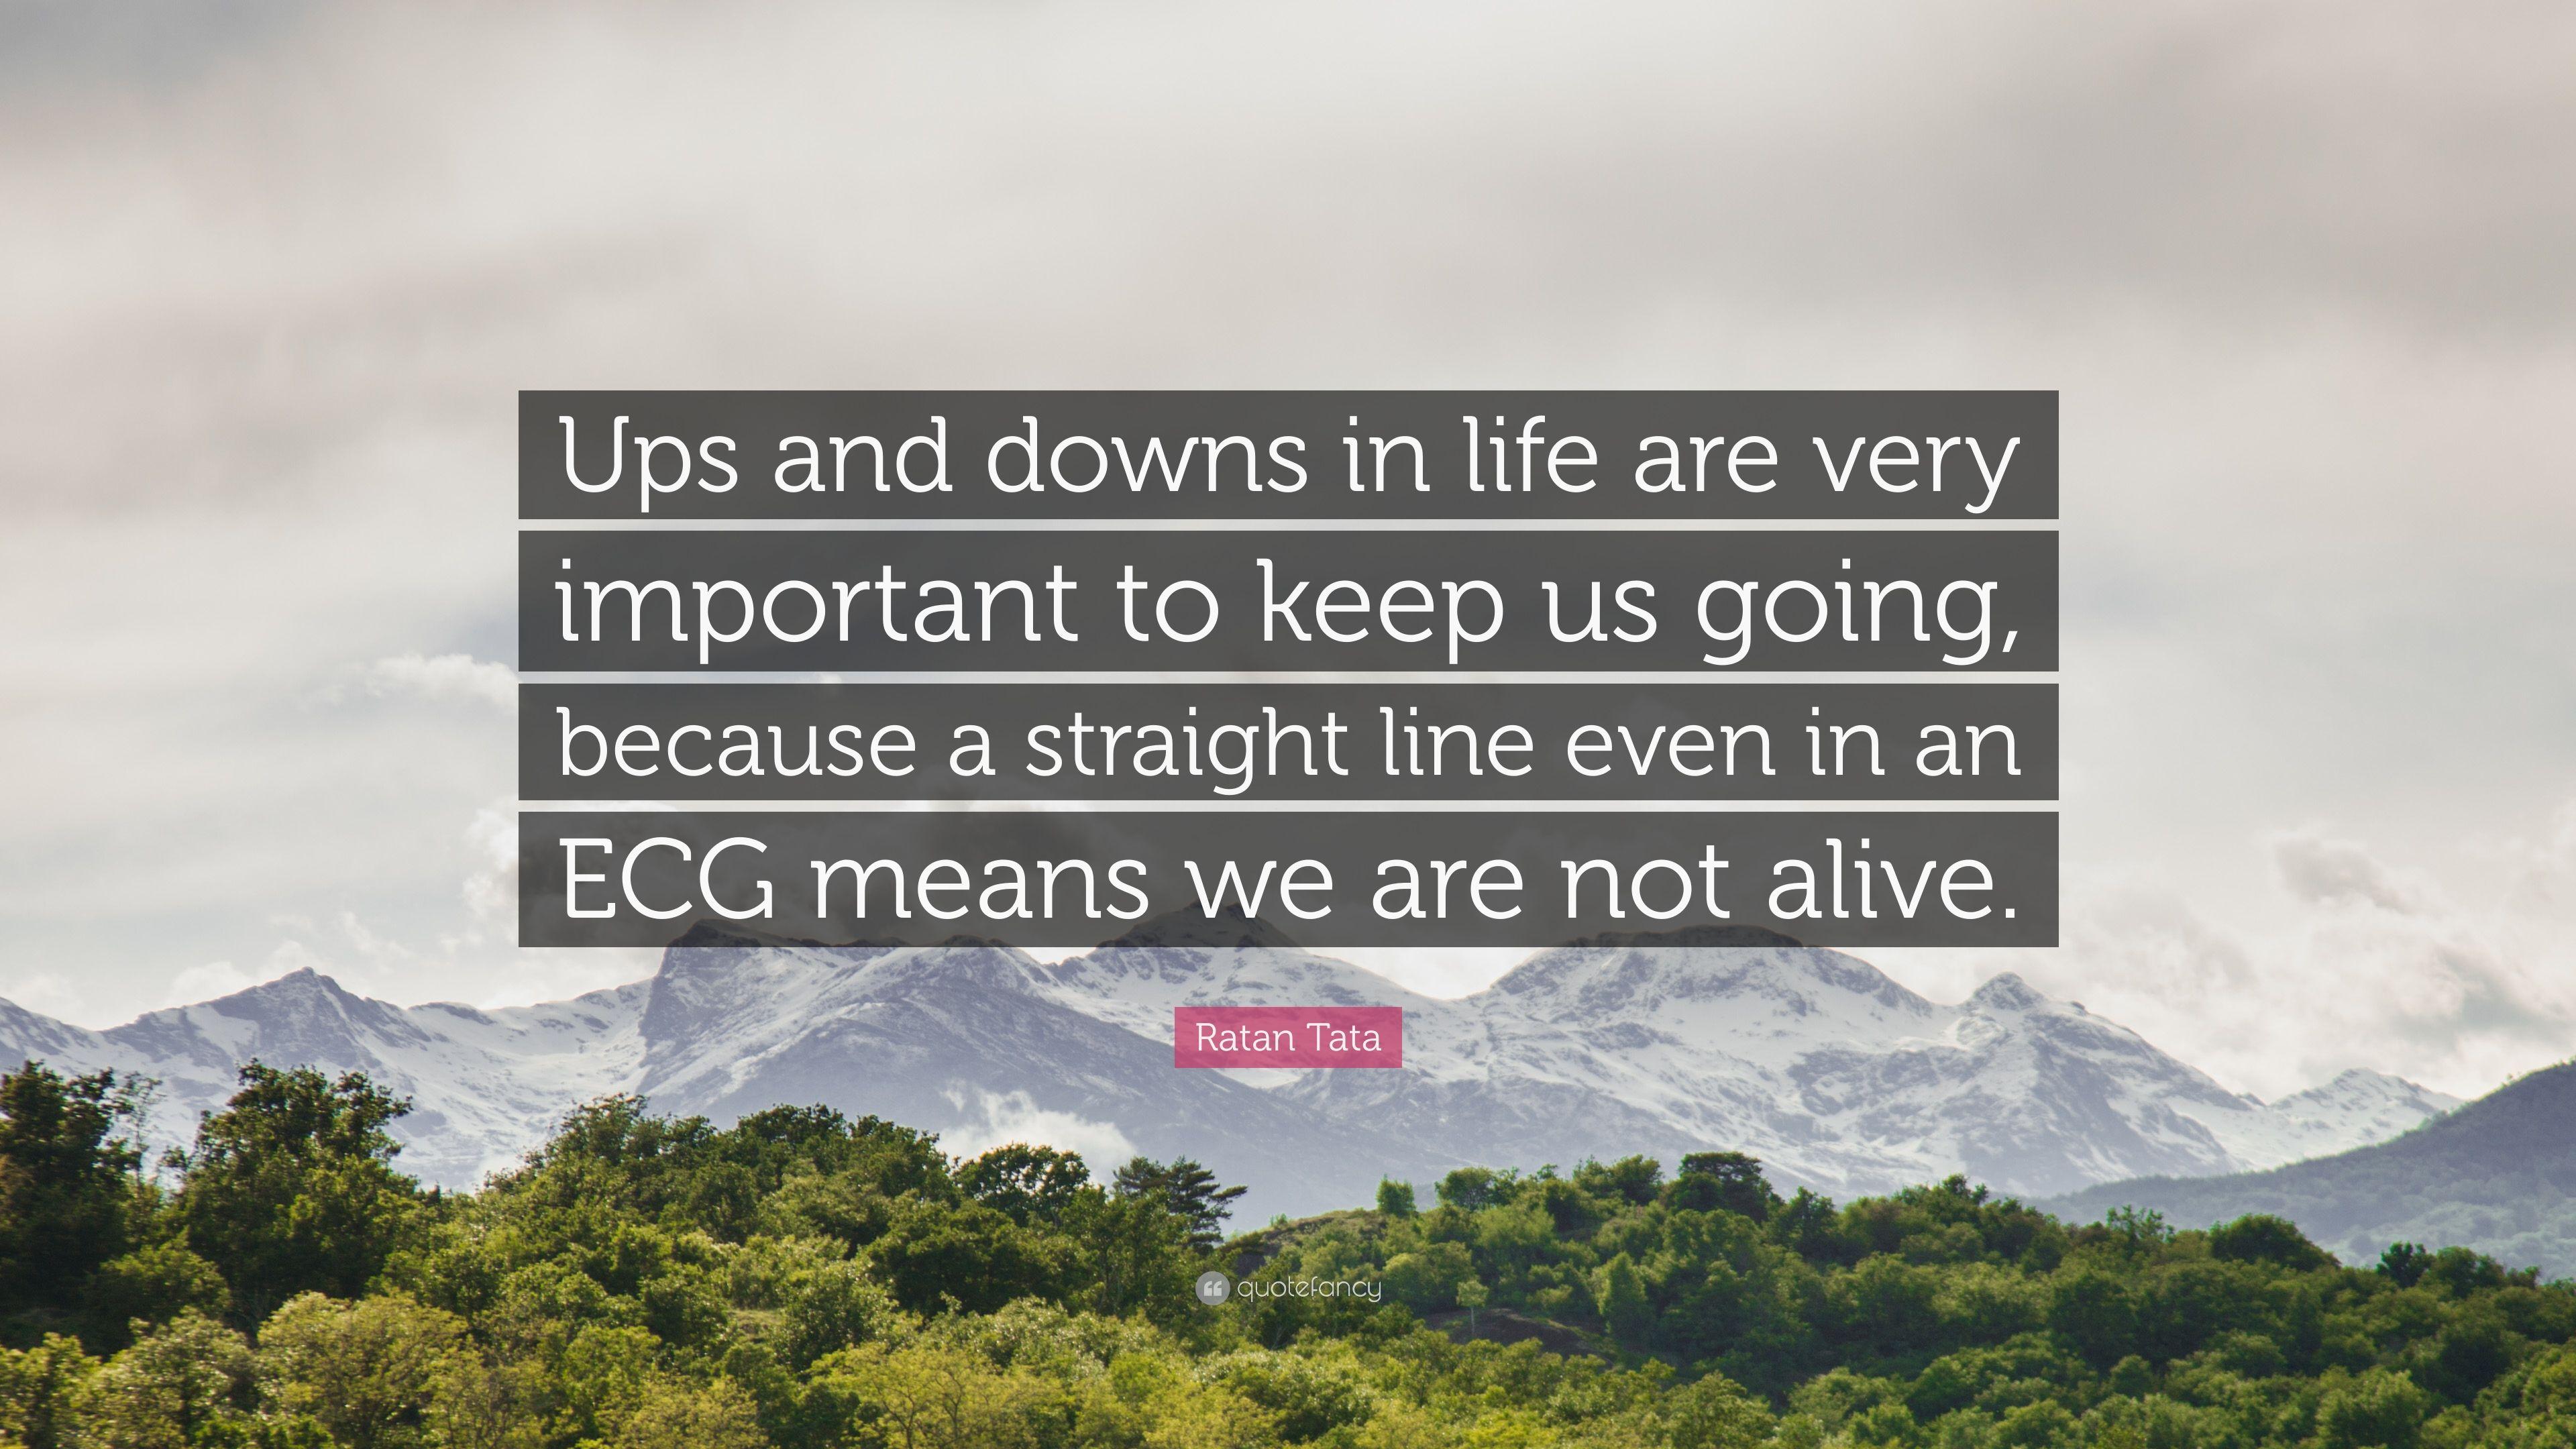 Ratan Tata Quote: “Ups and downs in life are very important to keep